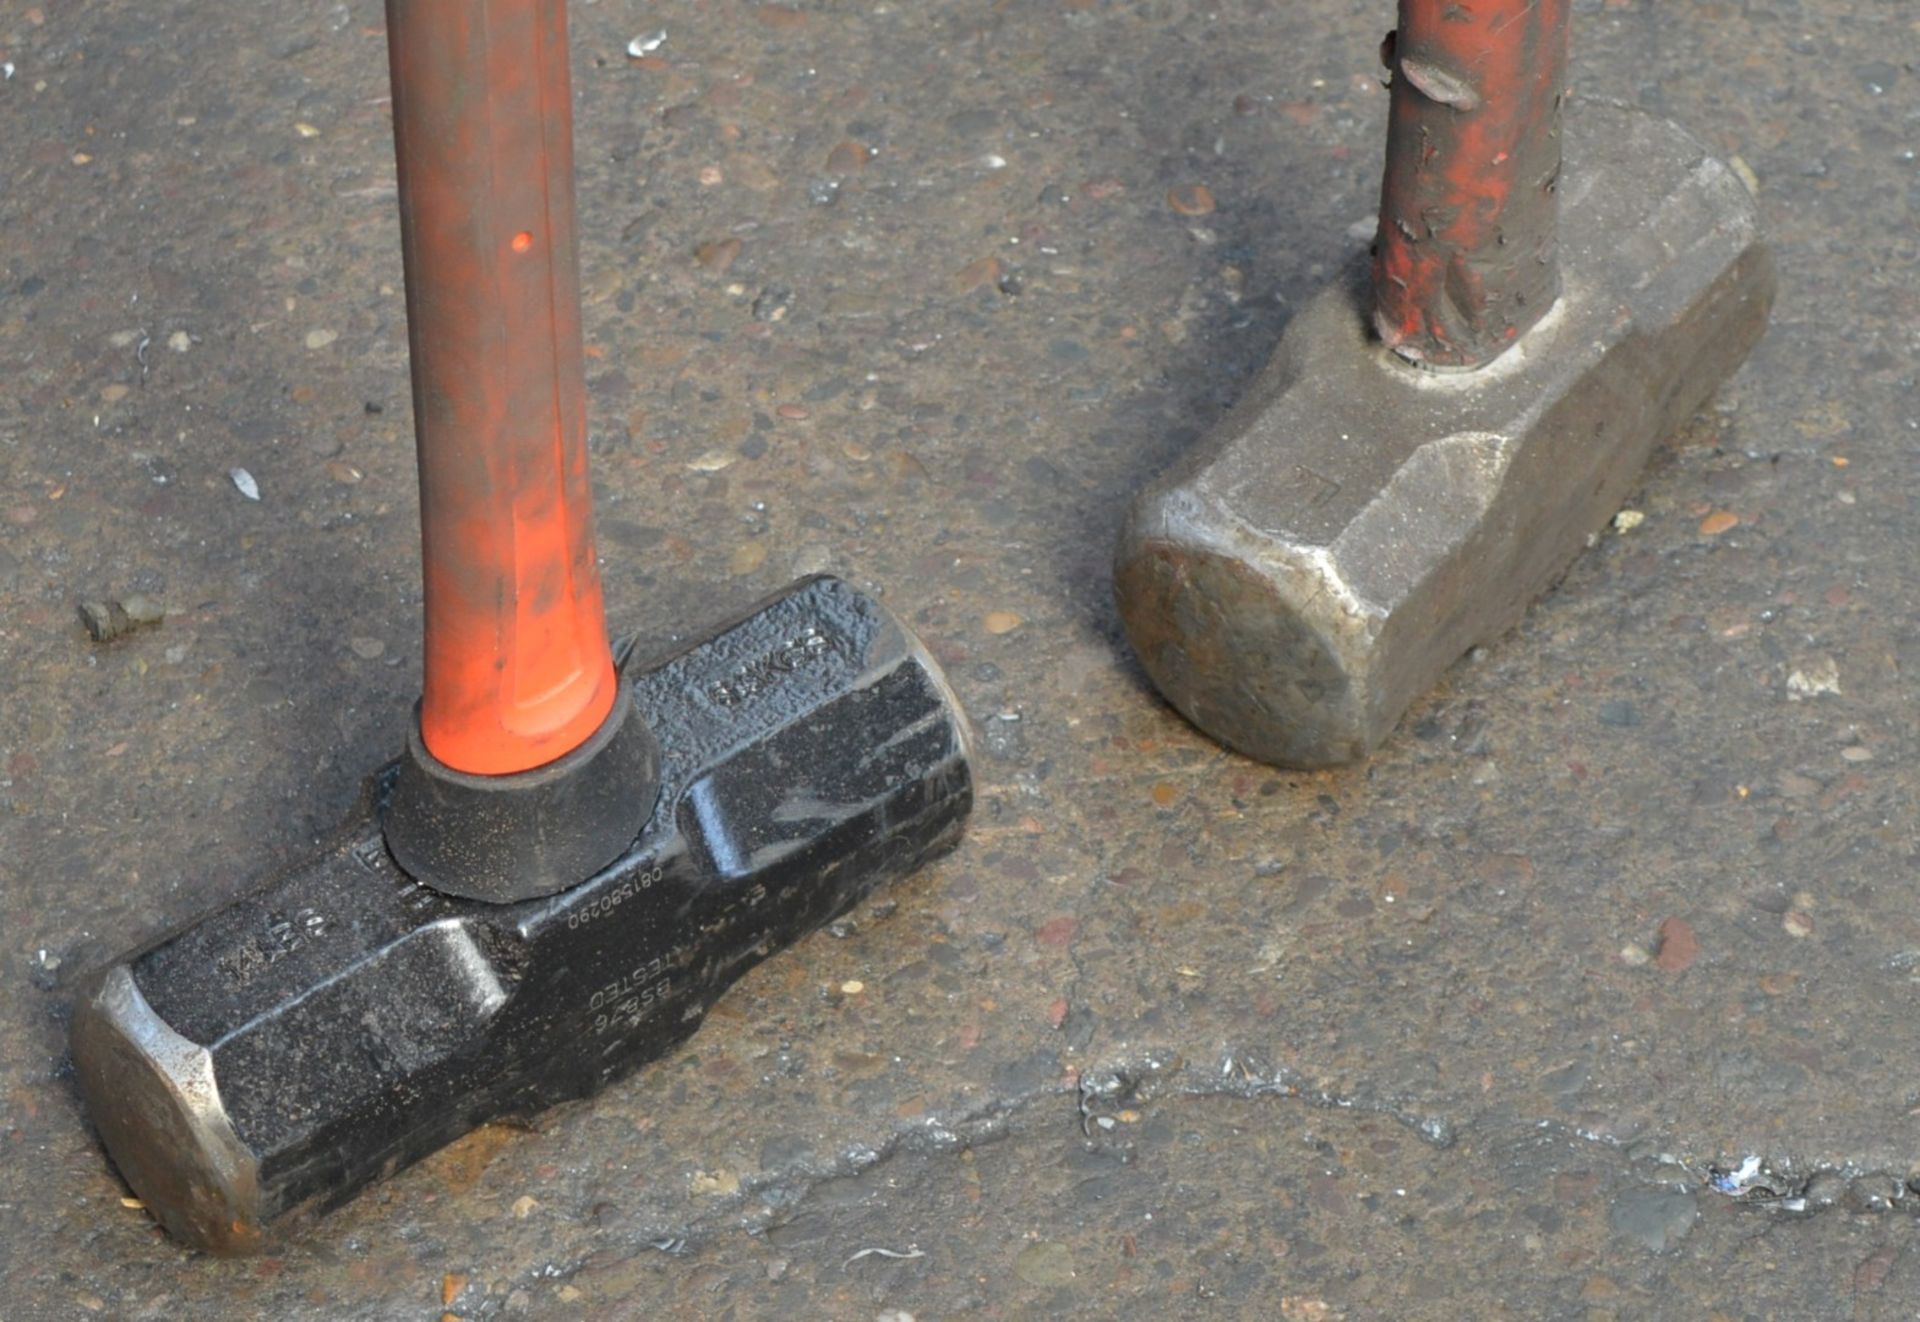 2 x Double Faced 14lb Sledge Hammers - CL202 - Ref EN036 - Location: Worcester WR14 - Image 3 of 3